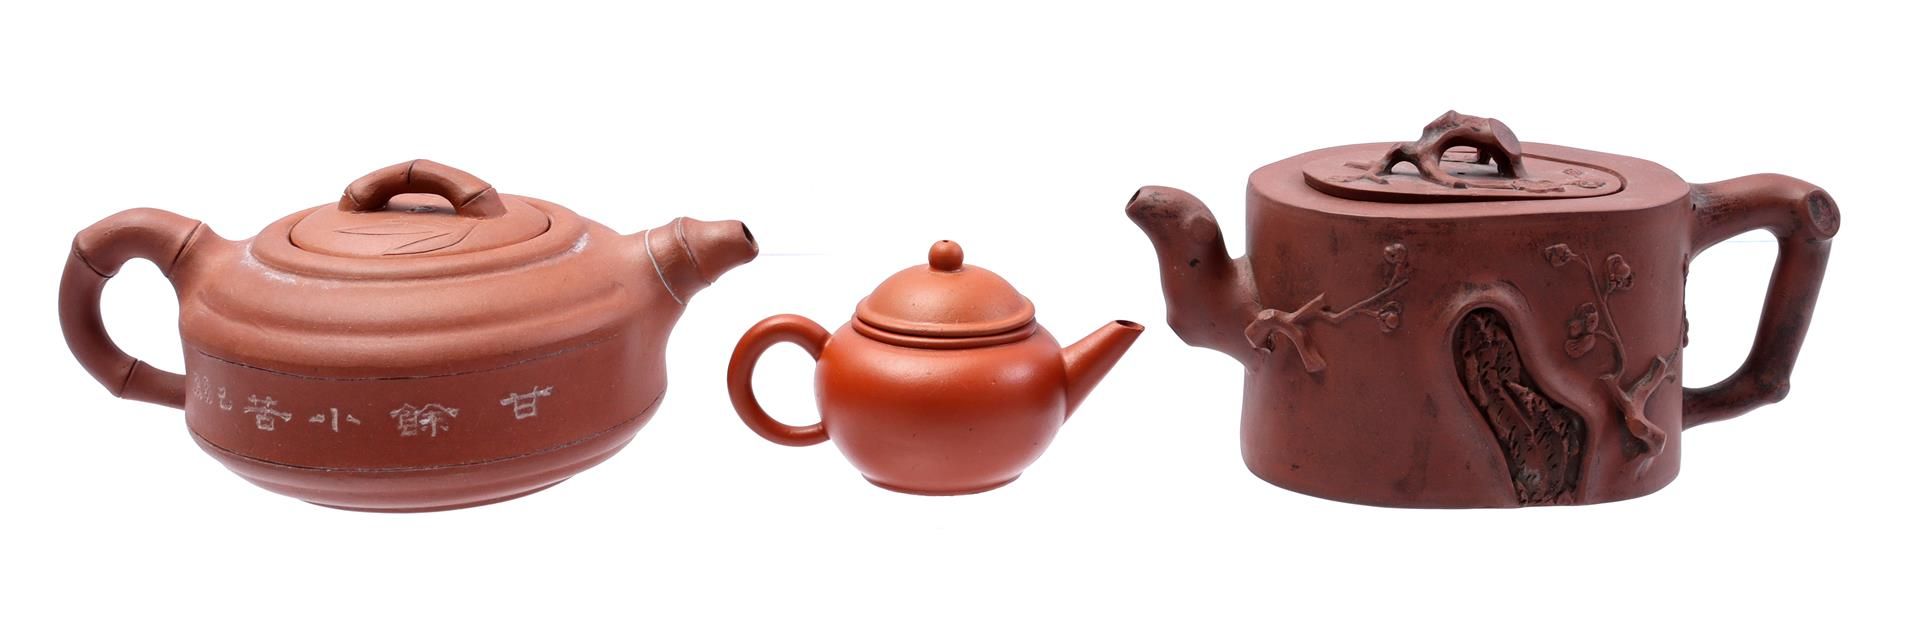 3 Yixing teapots, with bamboo décor